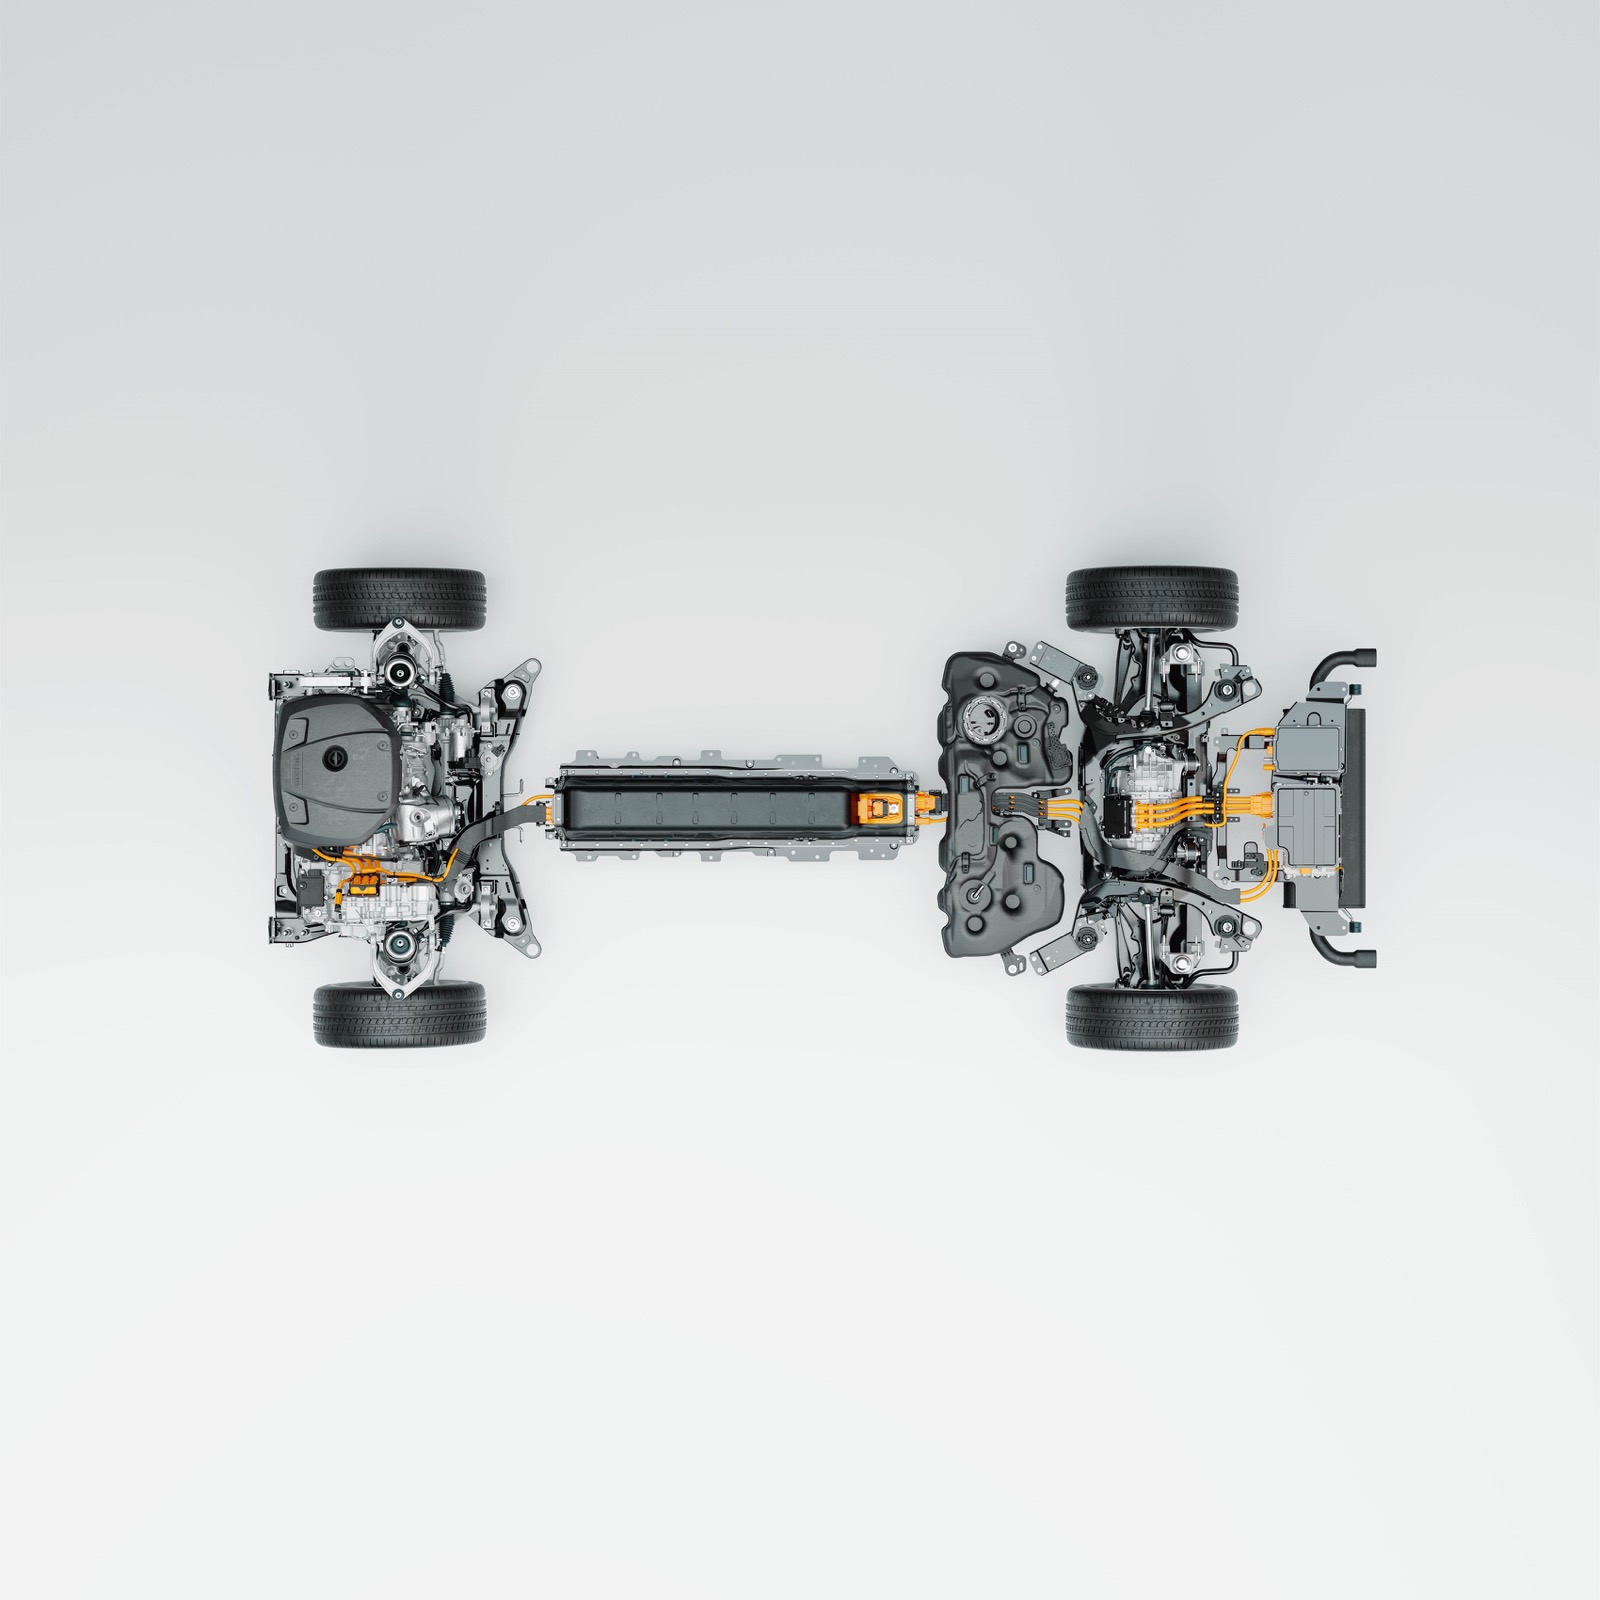 Technical Cutaway: Volvo Cars’ New Recharge Plug In Hybrid Powertrain Outperforms Average Daily Mileage On A Single Charge